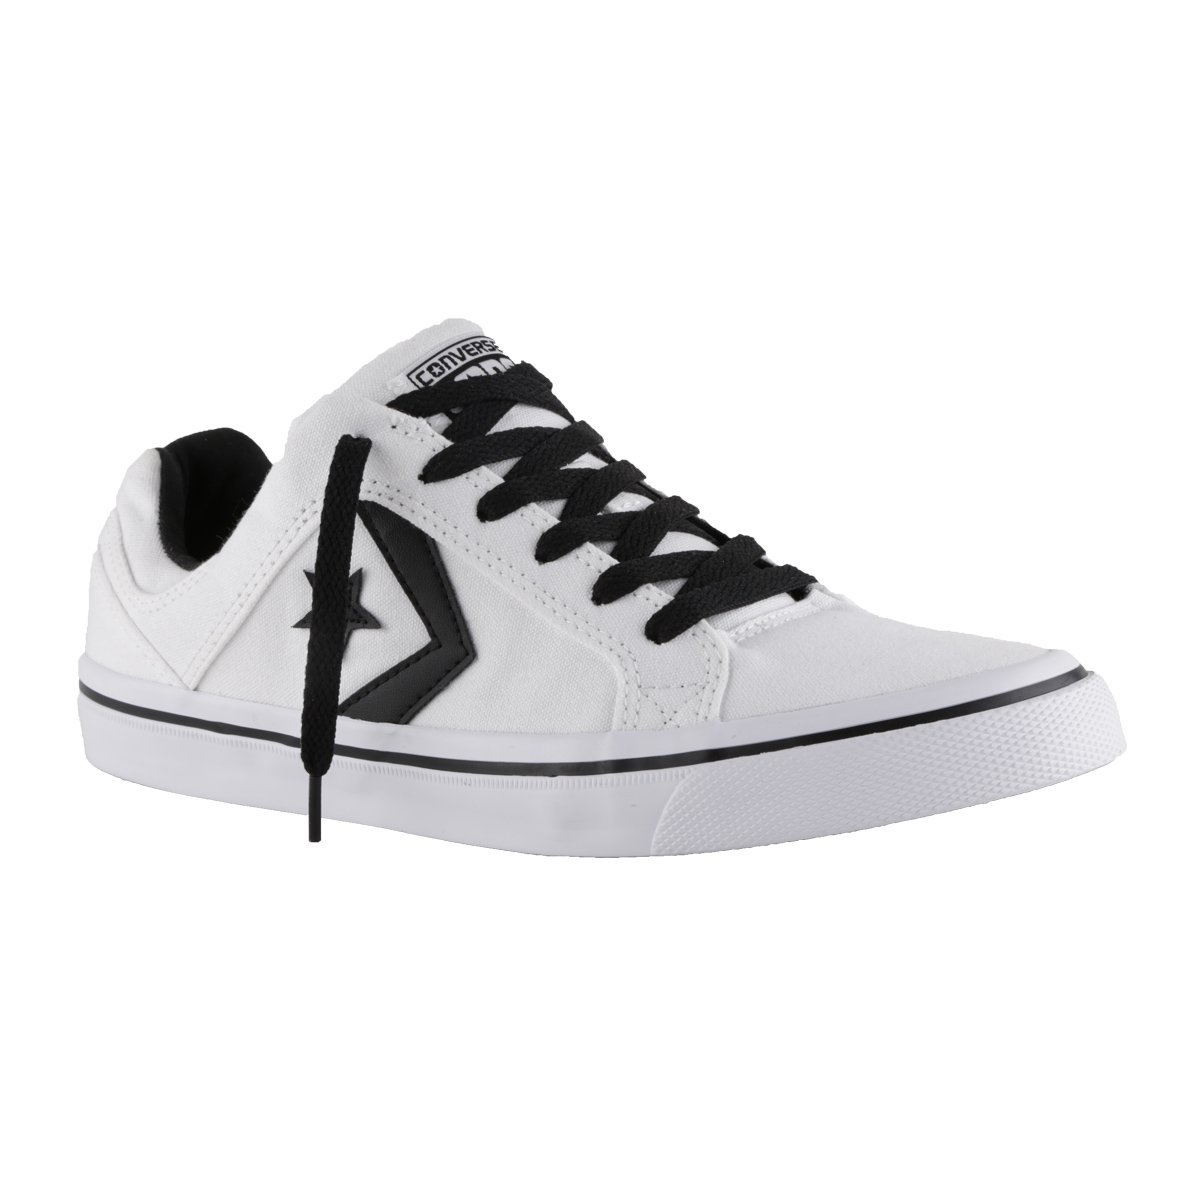 Tenis Choclo Casual Caballero Converse Star Player